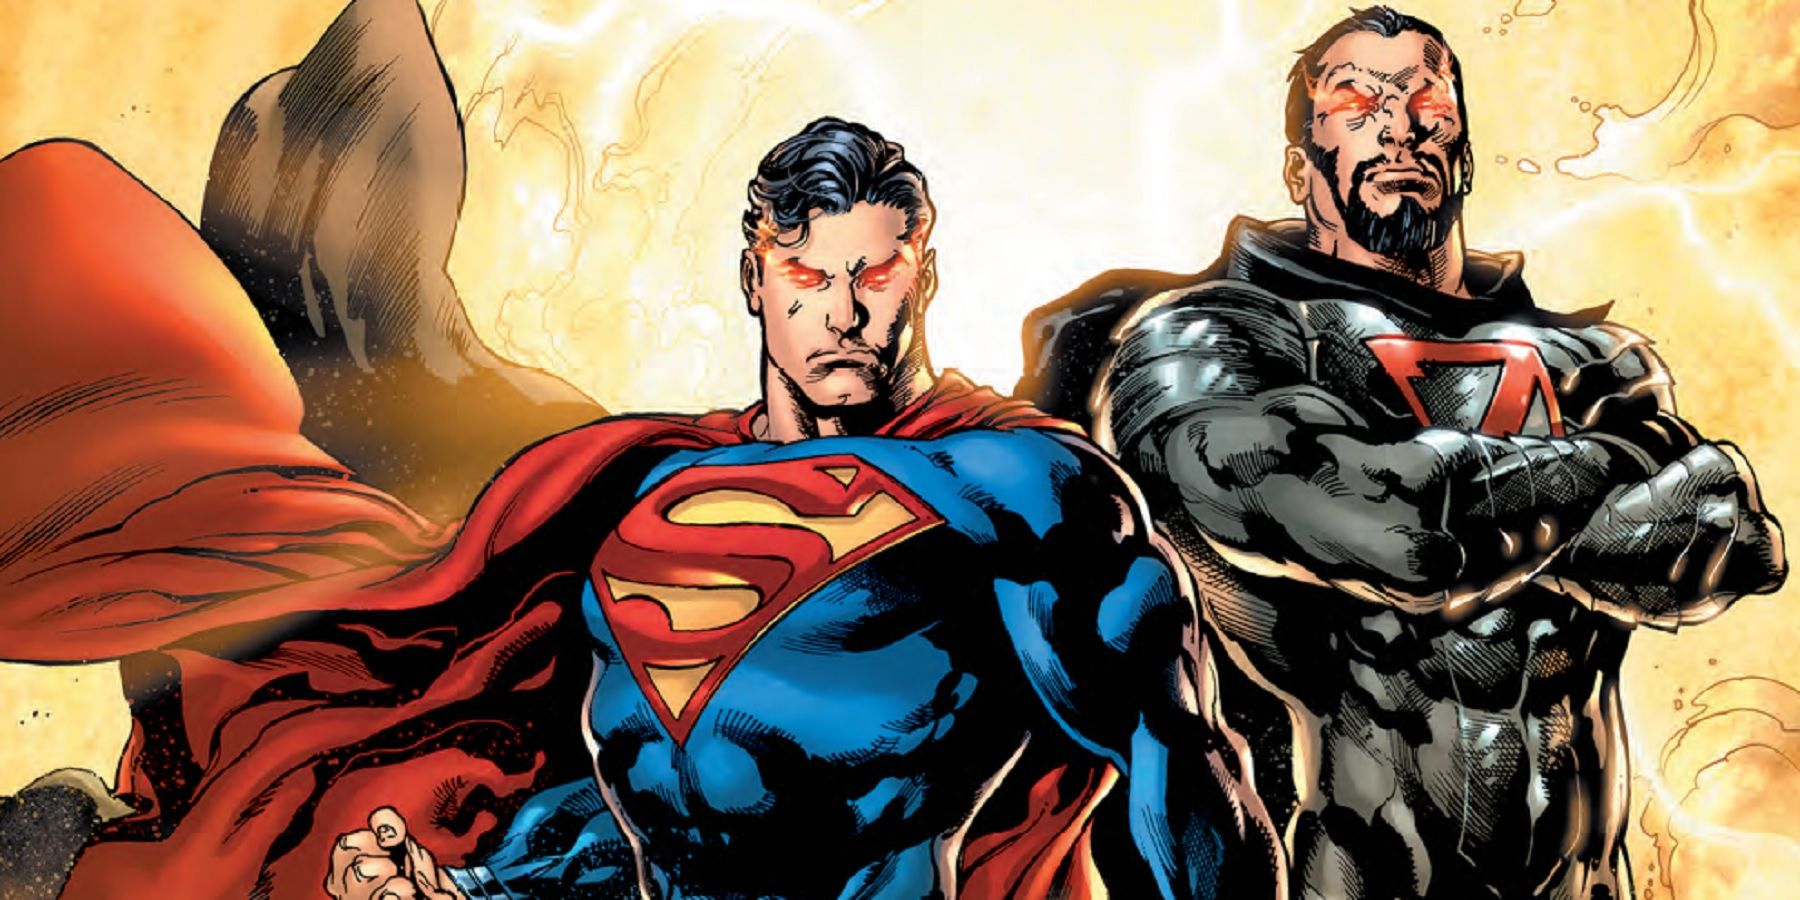 Superman and General Zod in DC Comics